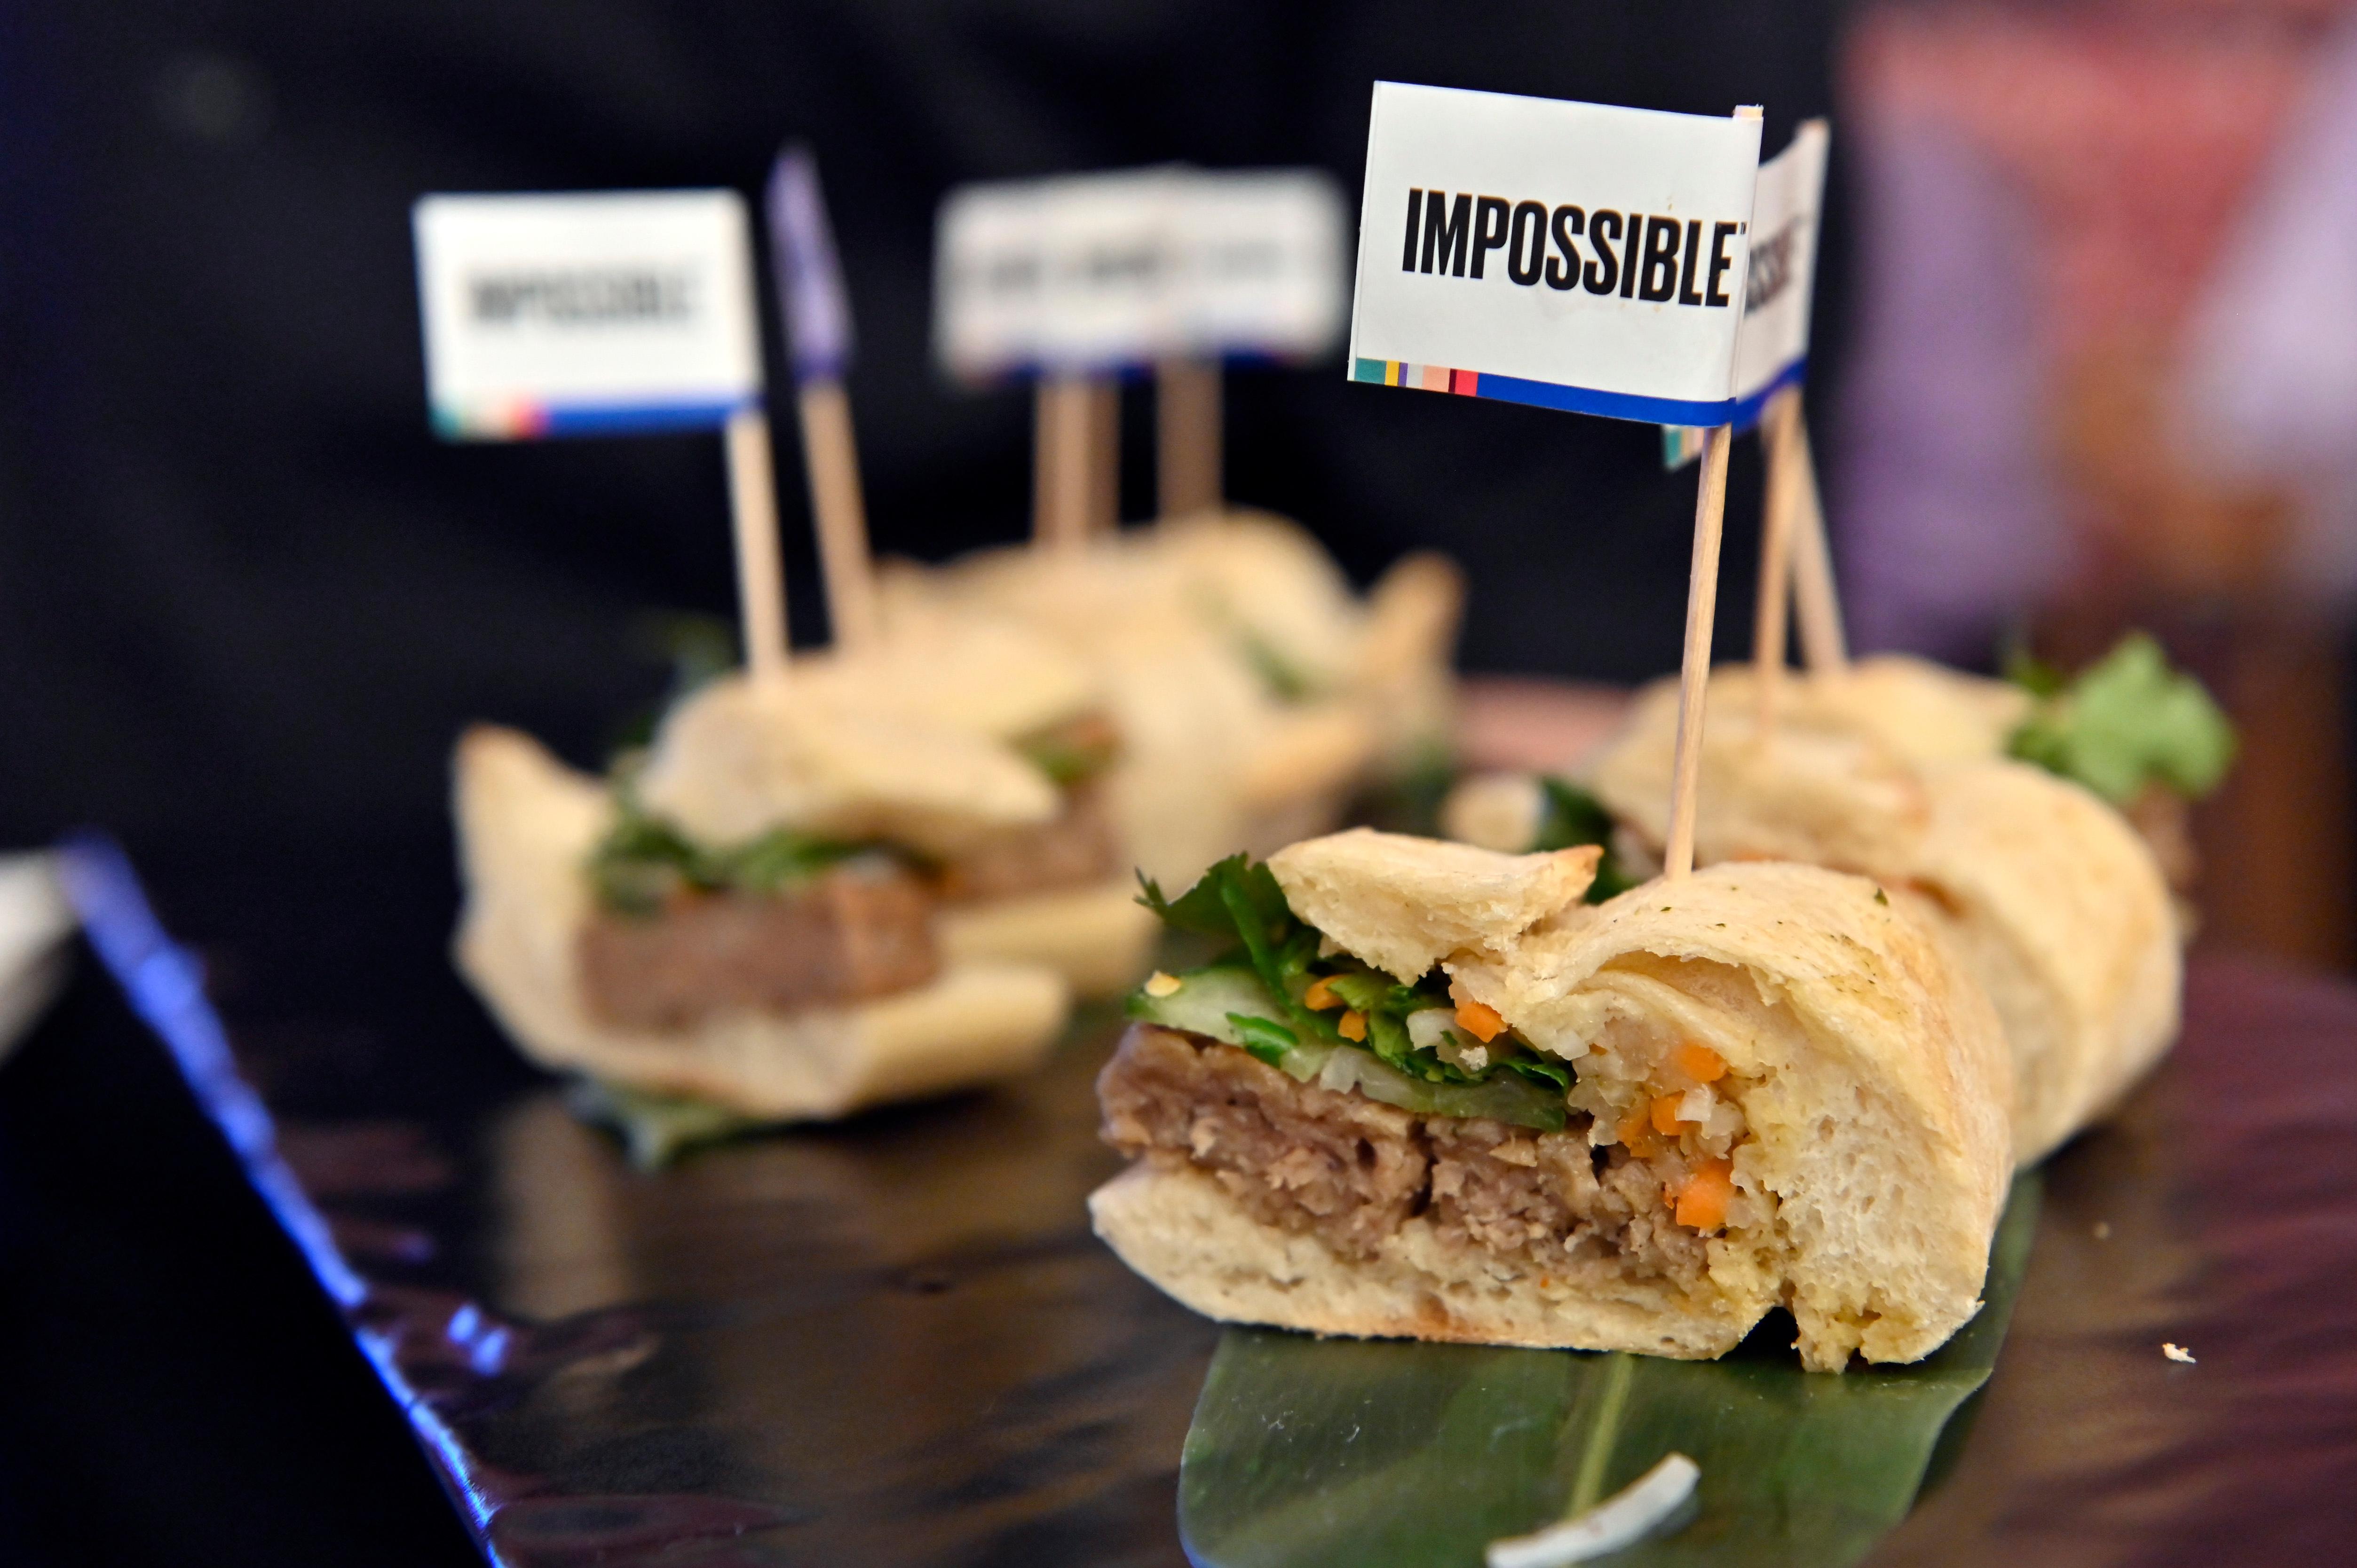 Impossible Foods sandwich